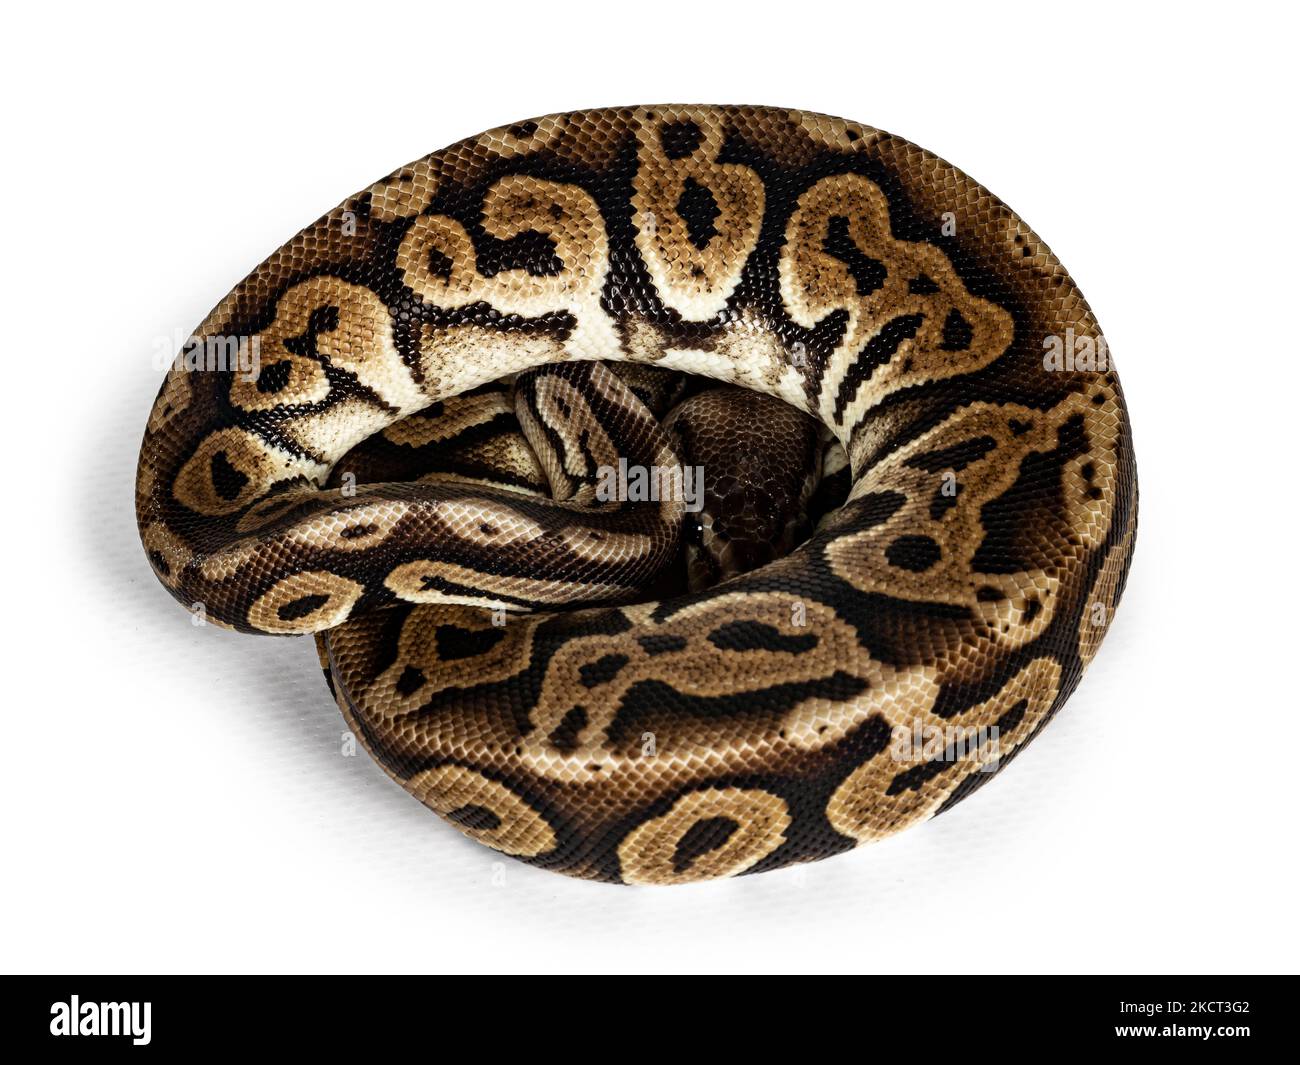 Top view curled up Ballpython aka Python regius, isolated on white background. Stock Photo